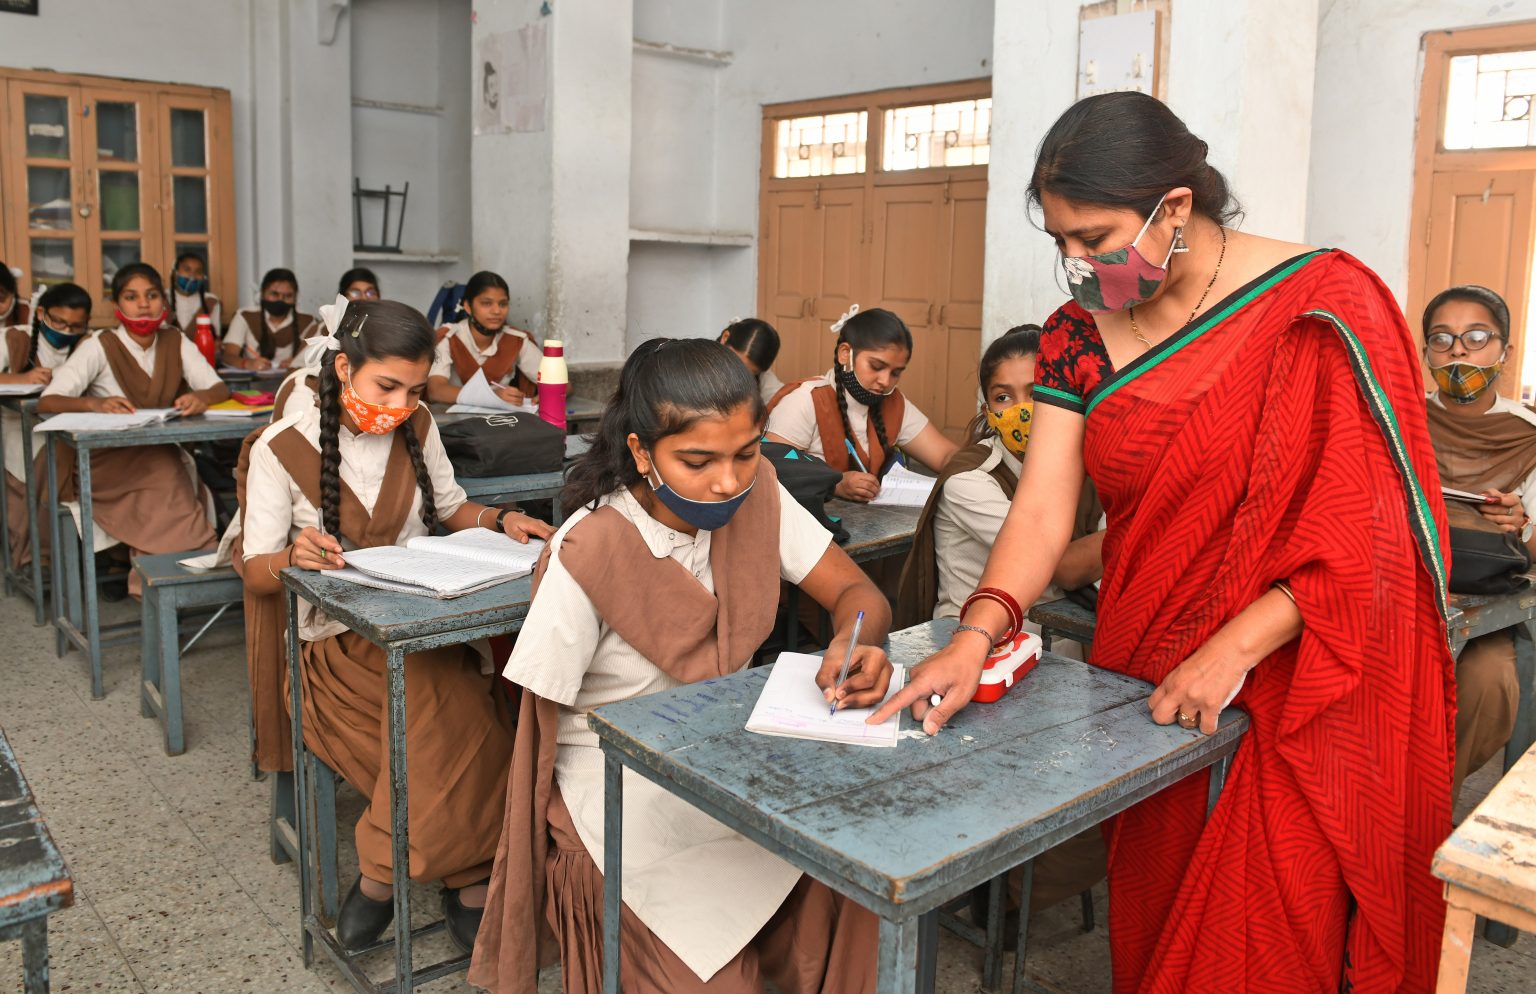 a classroom where several girls sit at school desks, the teacher stands at one of the desks and helps one of the girls who lacks an arm